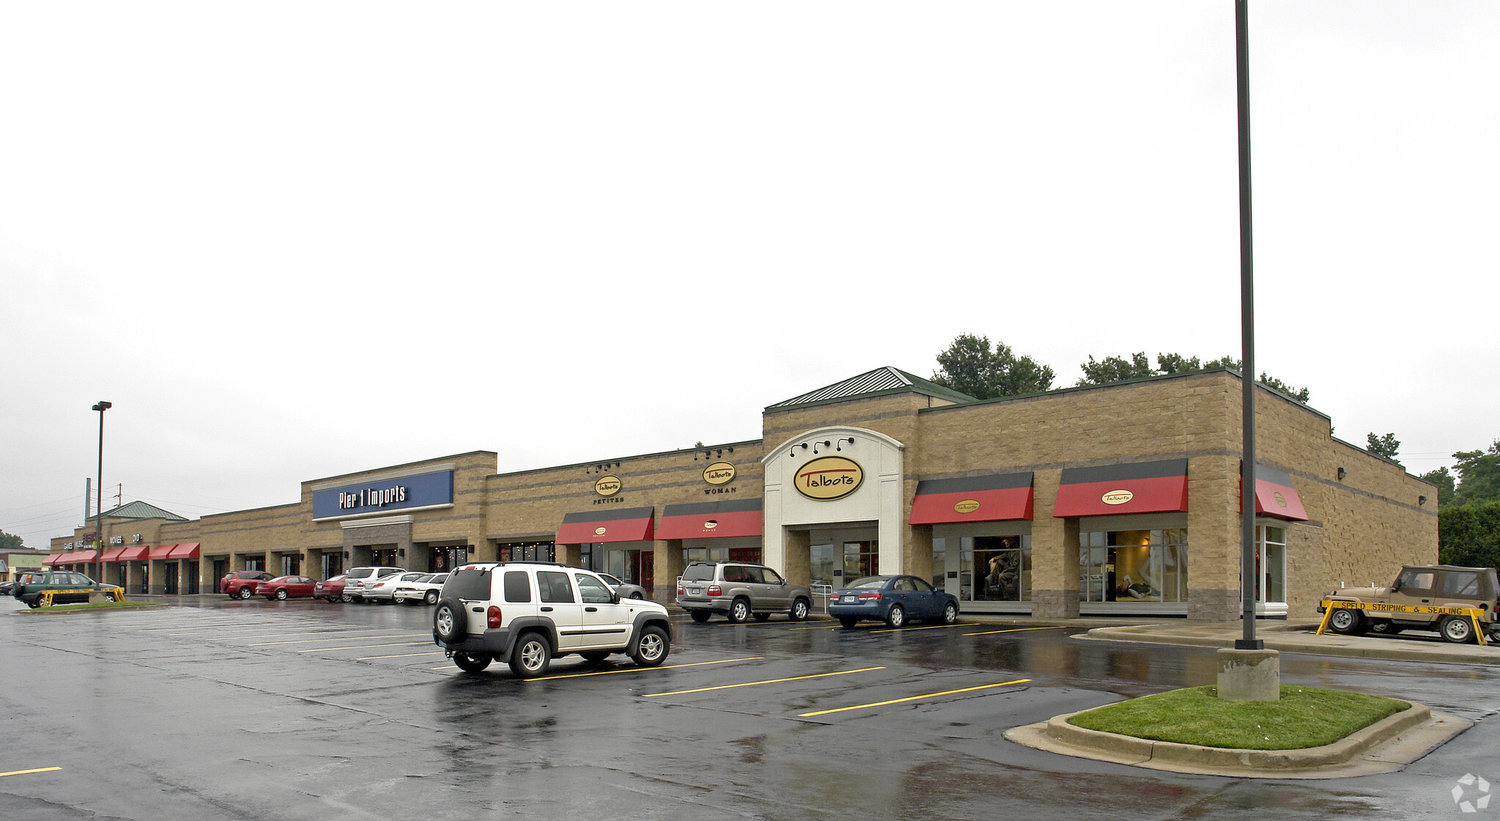 Pier 1 Imports operates in Springfield out of the Battlefield Square Shoppes.